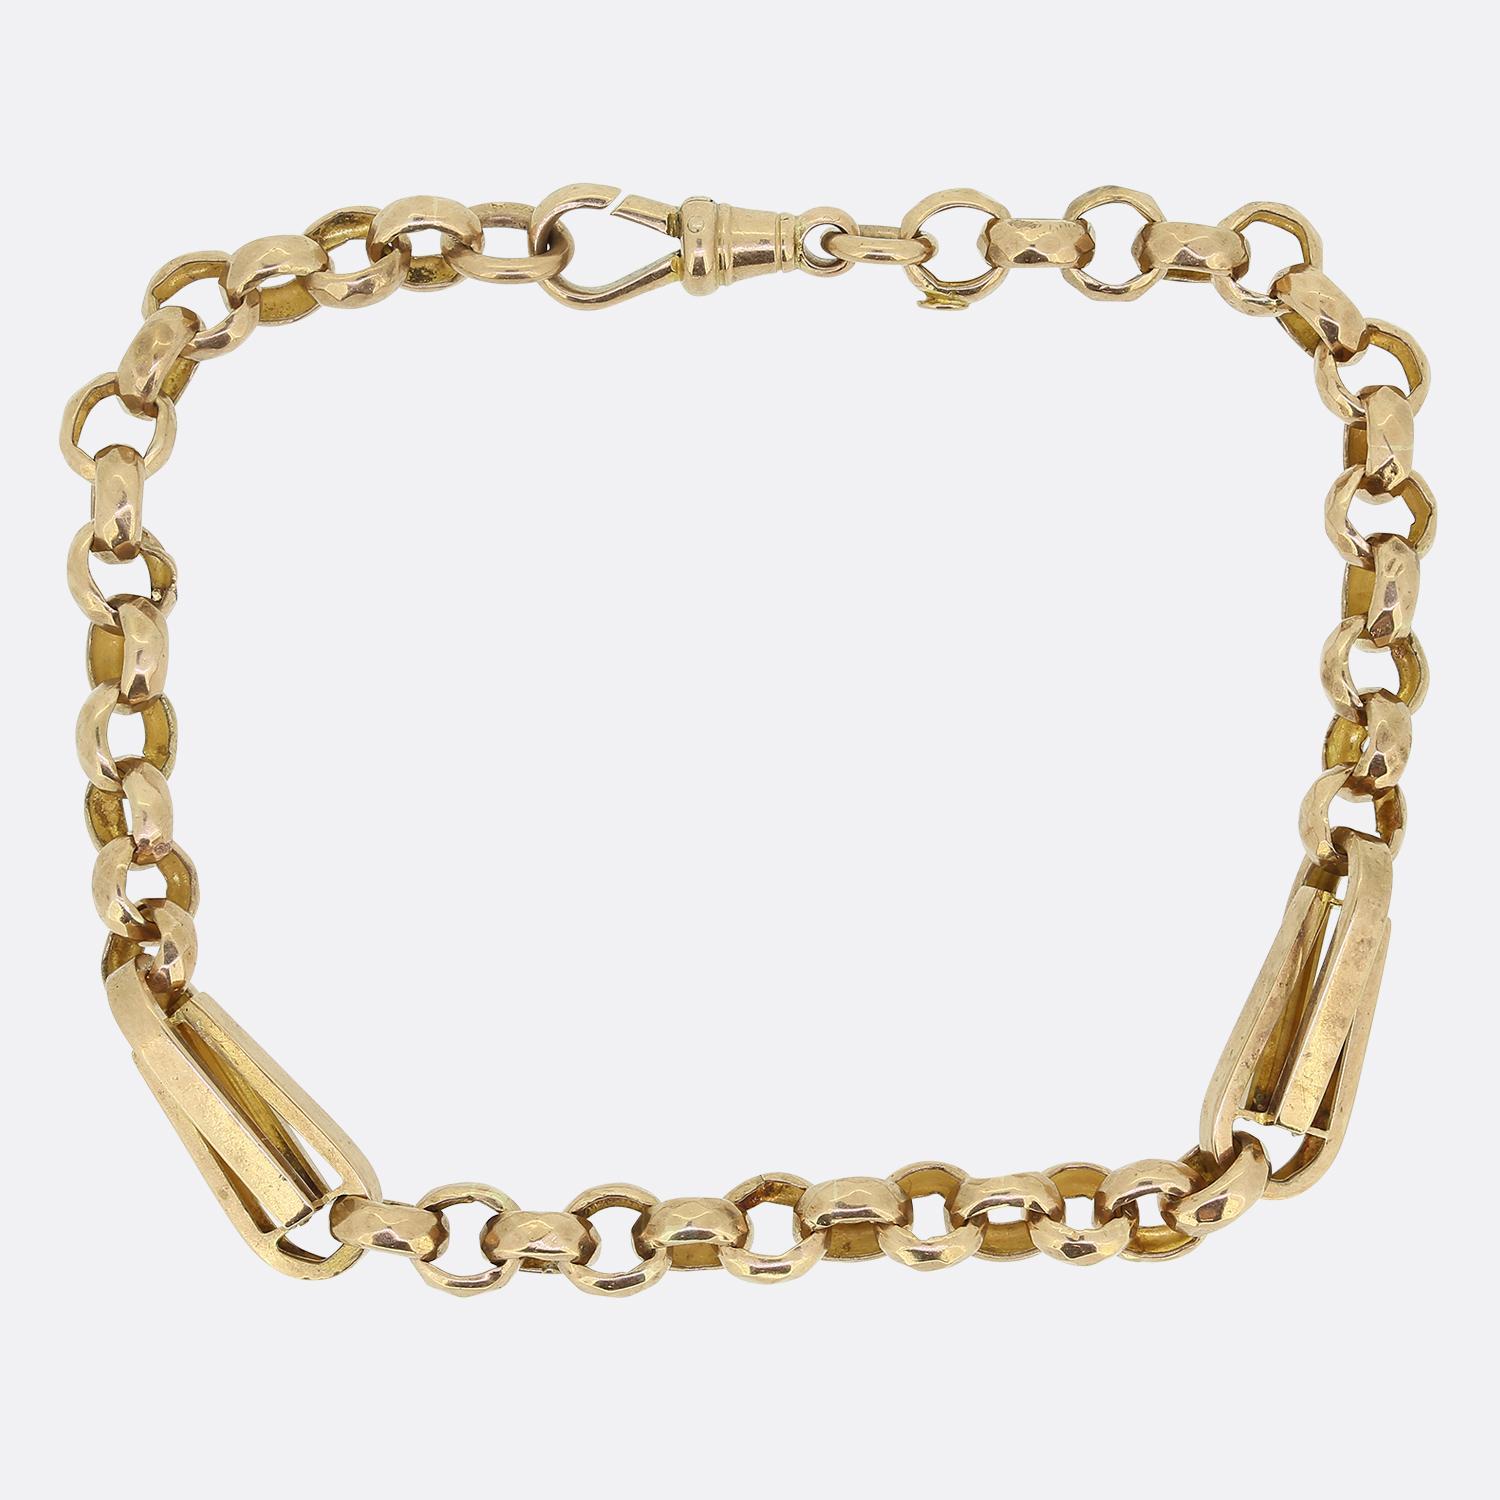 Here we have a lovely vintage chain bracelet. This piece has been crafted from 9ct yellow gold with a slight rose tint and is comprised of faceted belcher links which is securely fastened around the wrist via a dog clip clasp. 

A wonderfully